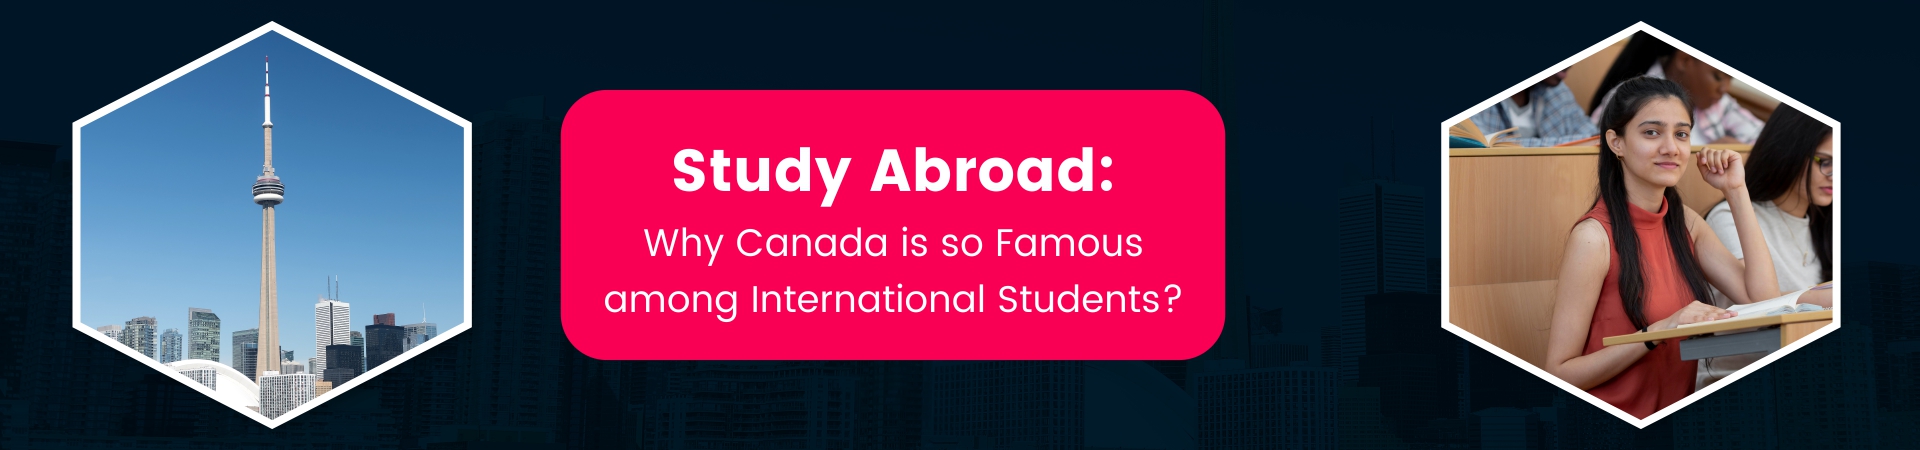 Study Abroad: Why Canada is so Famous among International Students?